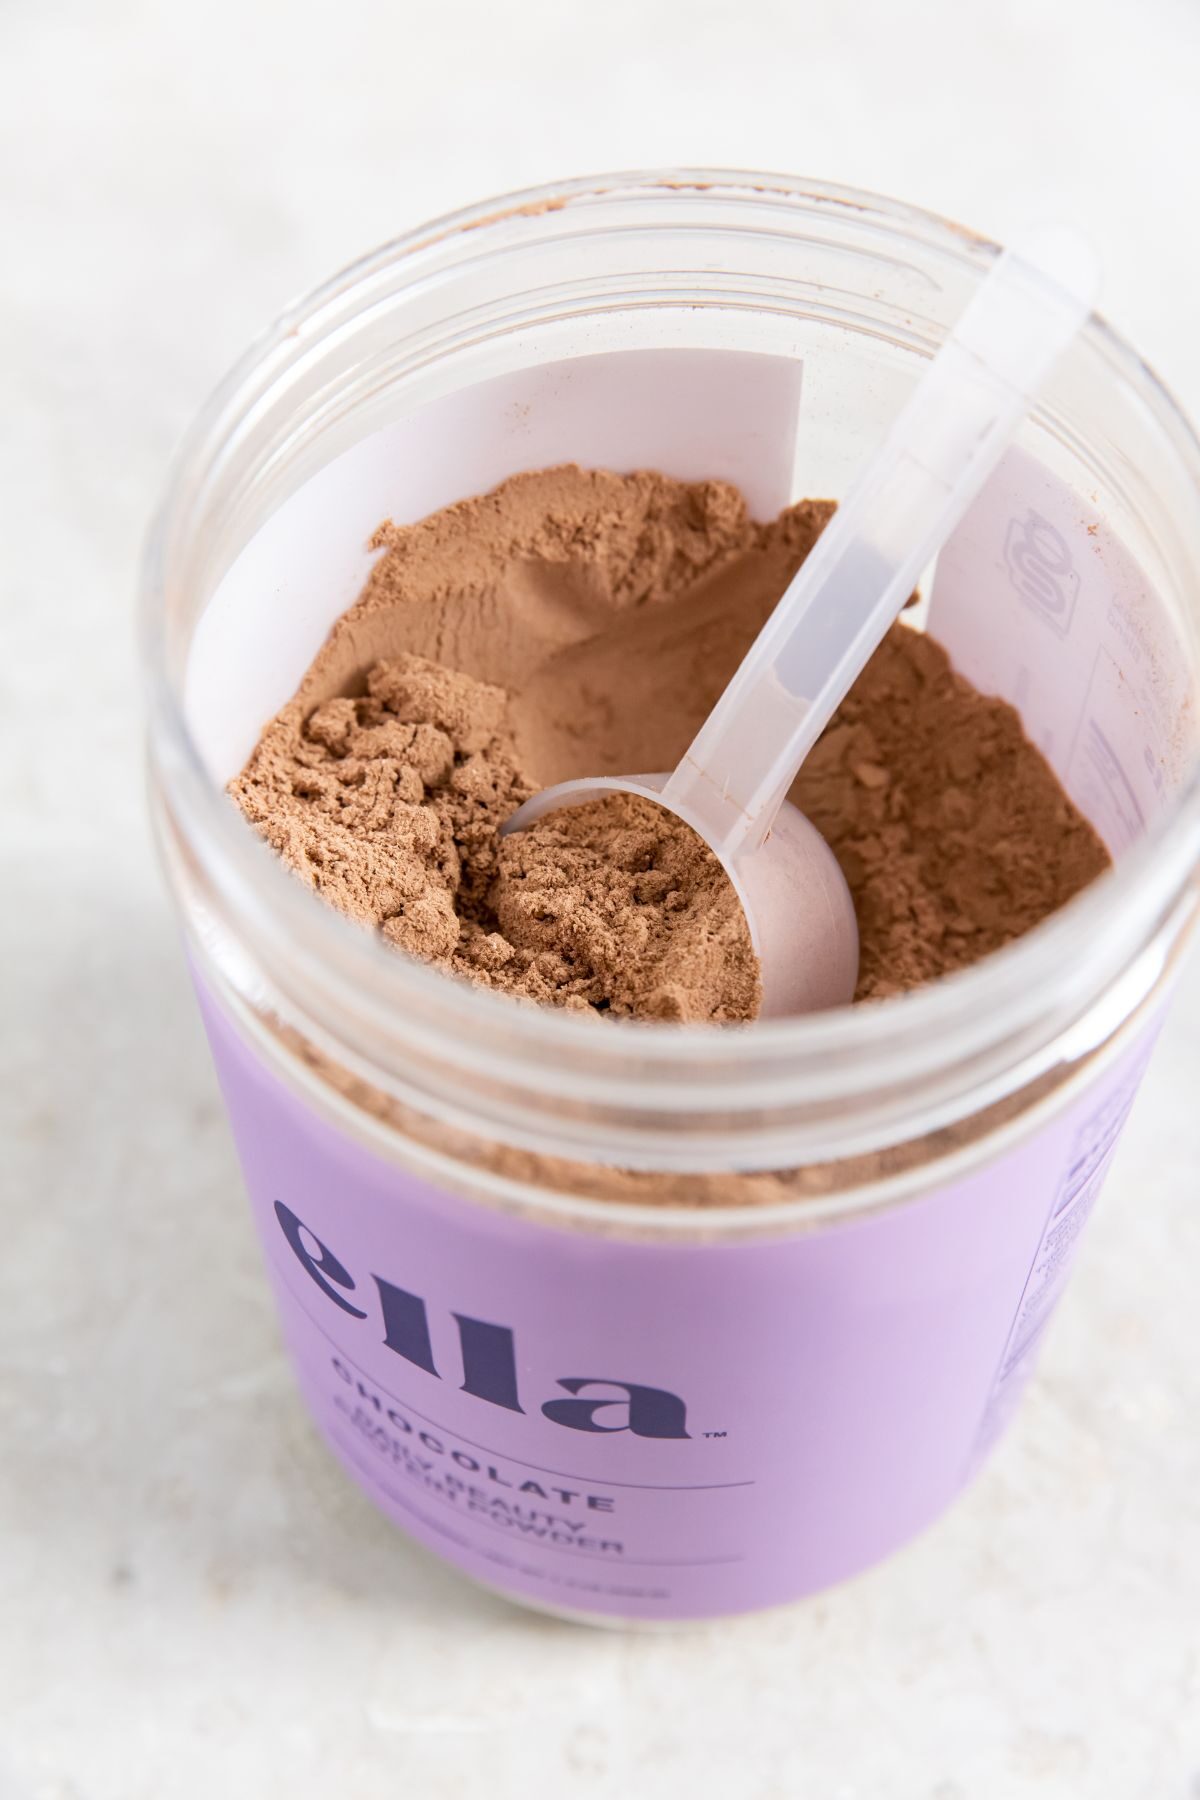 Tub of naked nutrition's Ella daily beauty protein powder.